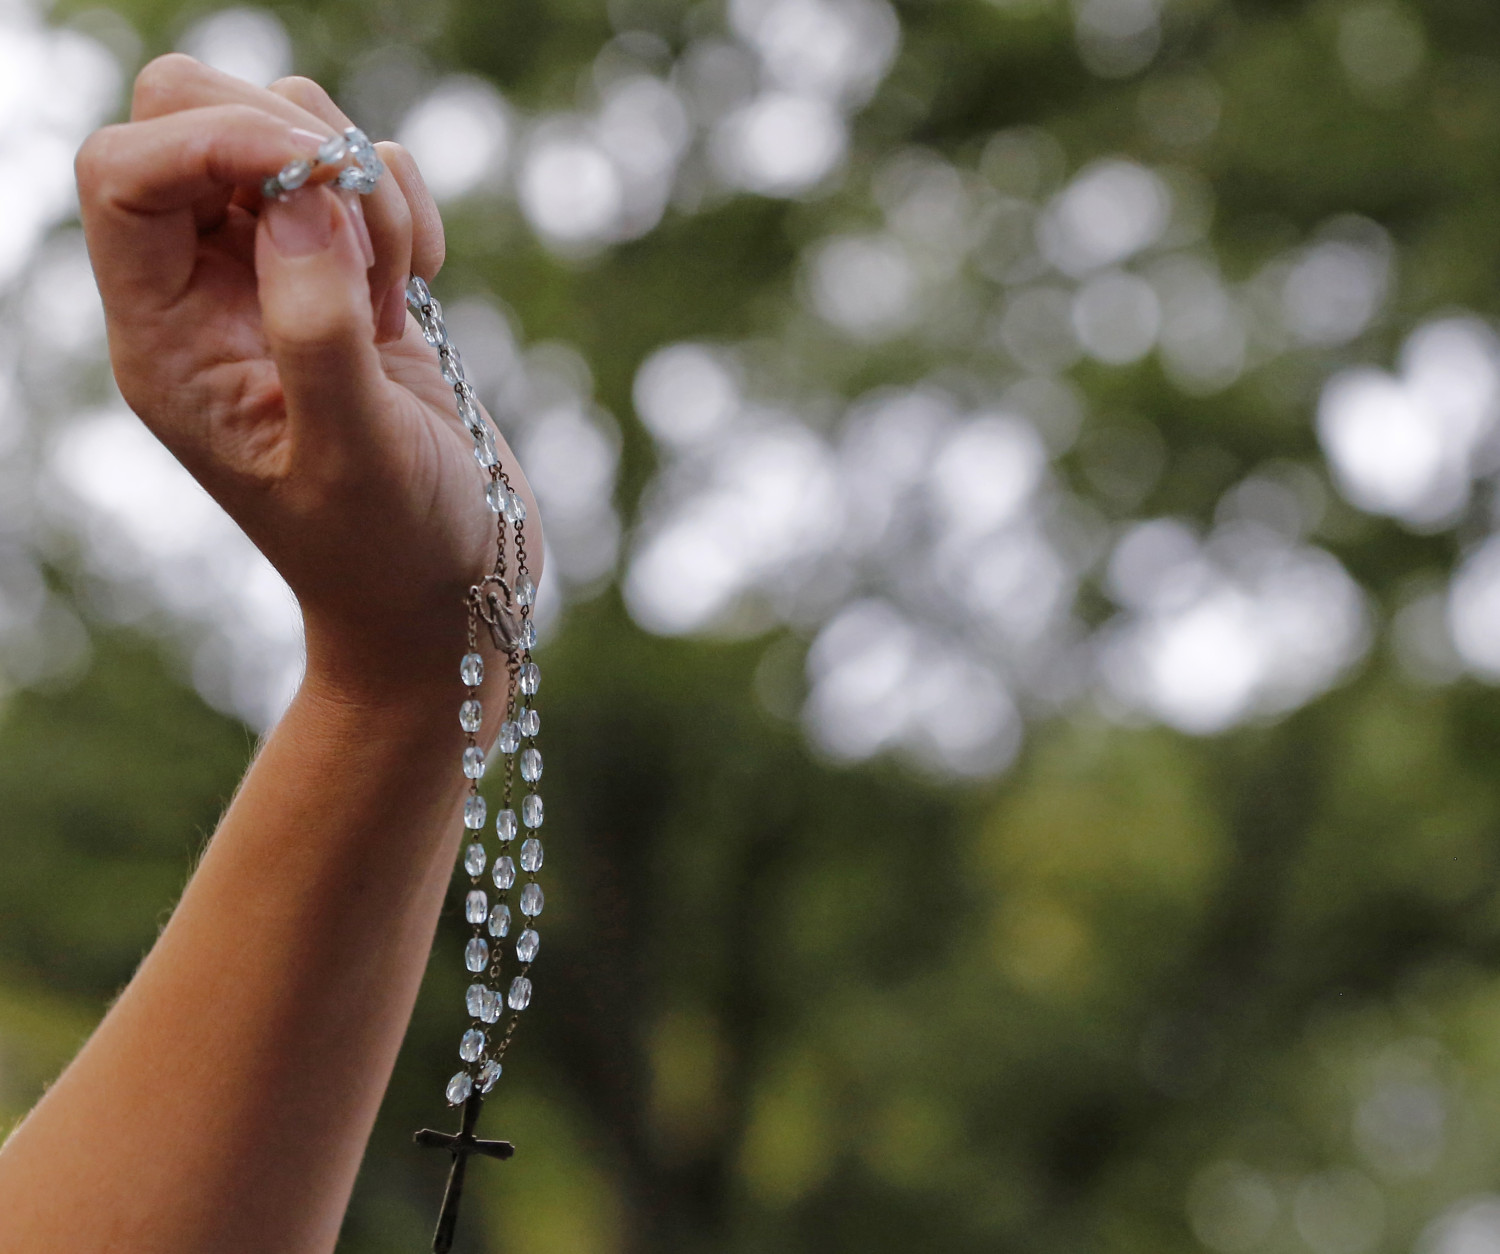 A woman holds up rosary beads as Pope Francis' motorcade passes through Central Park during his visit to New York, Friday, Sept. 25, 2015.  (AP Photo/Kathy Willens)